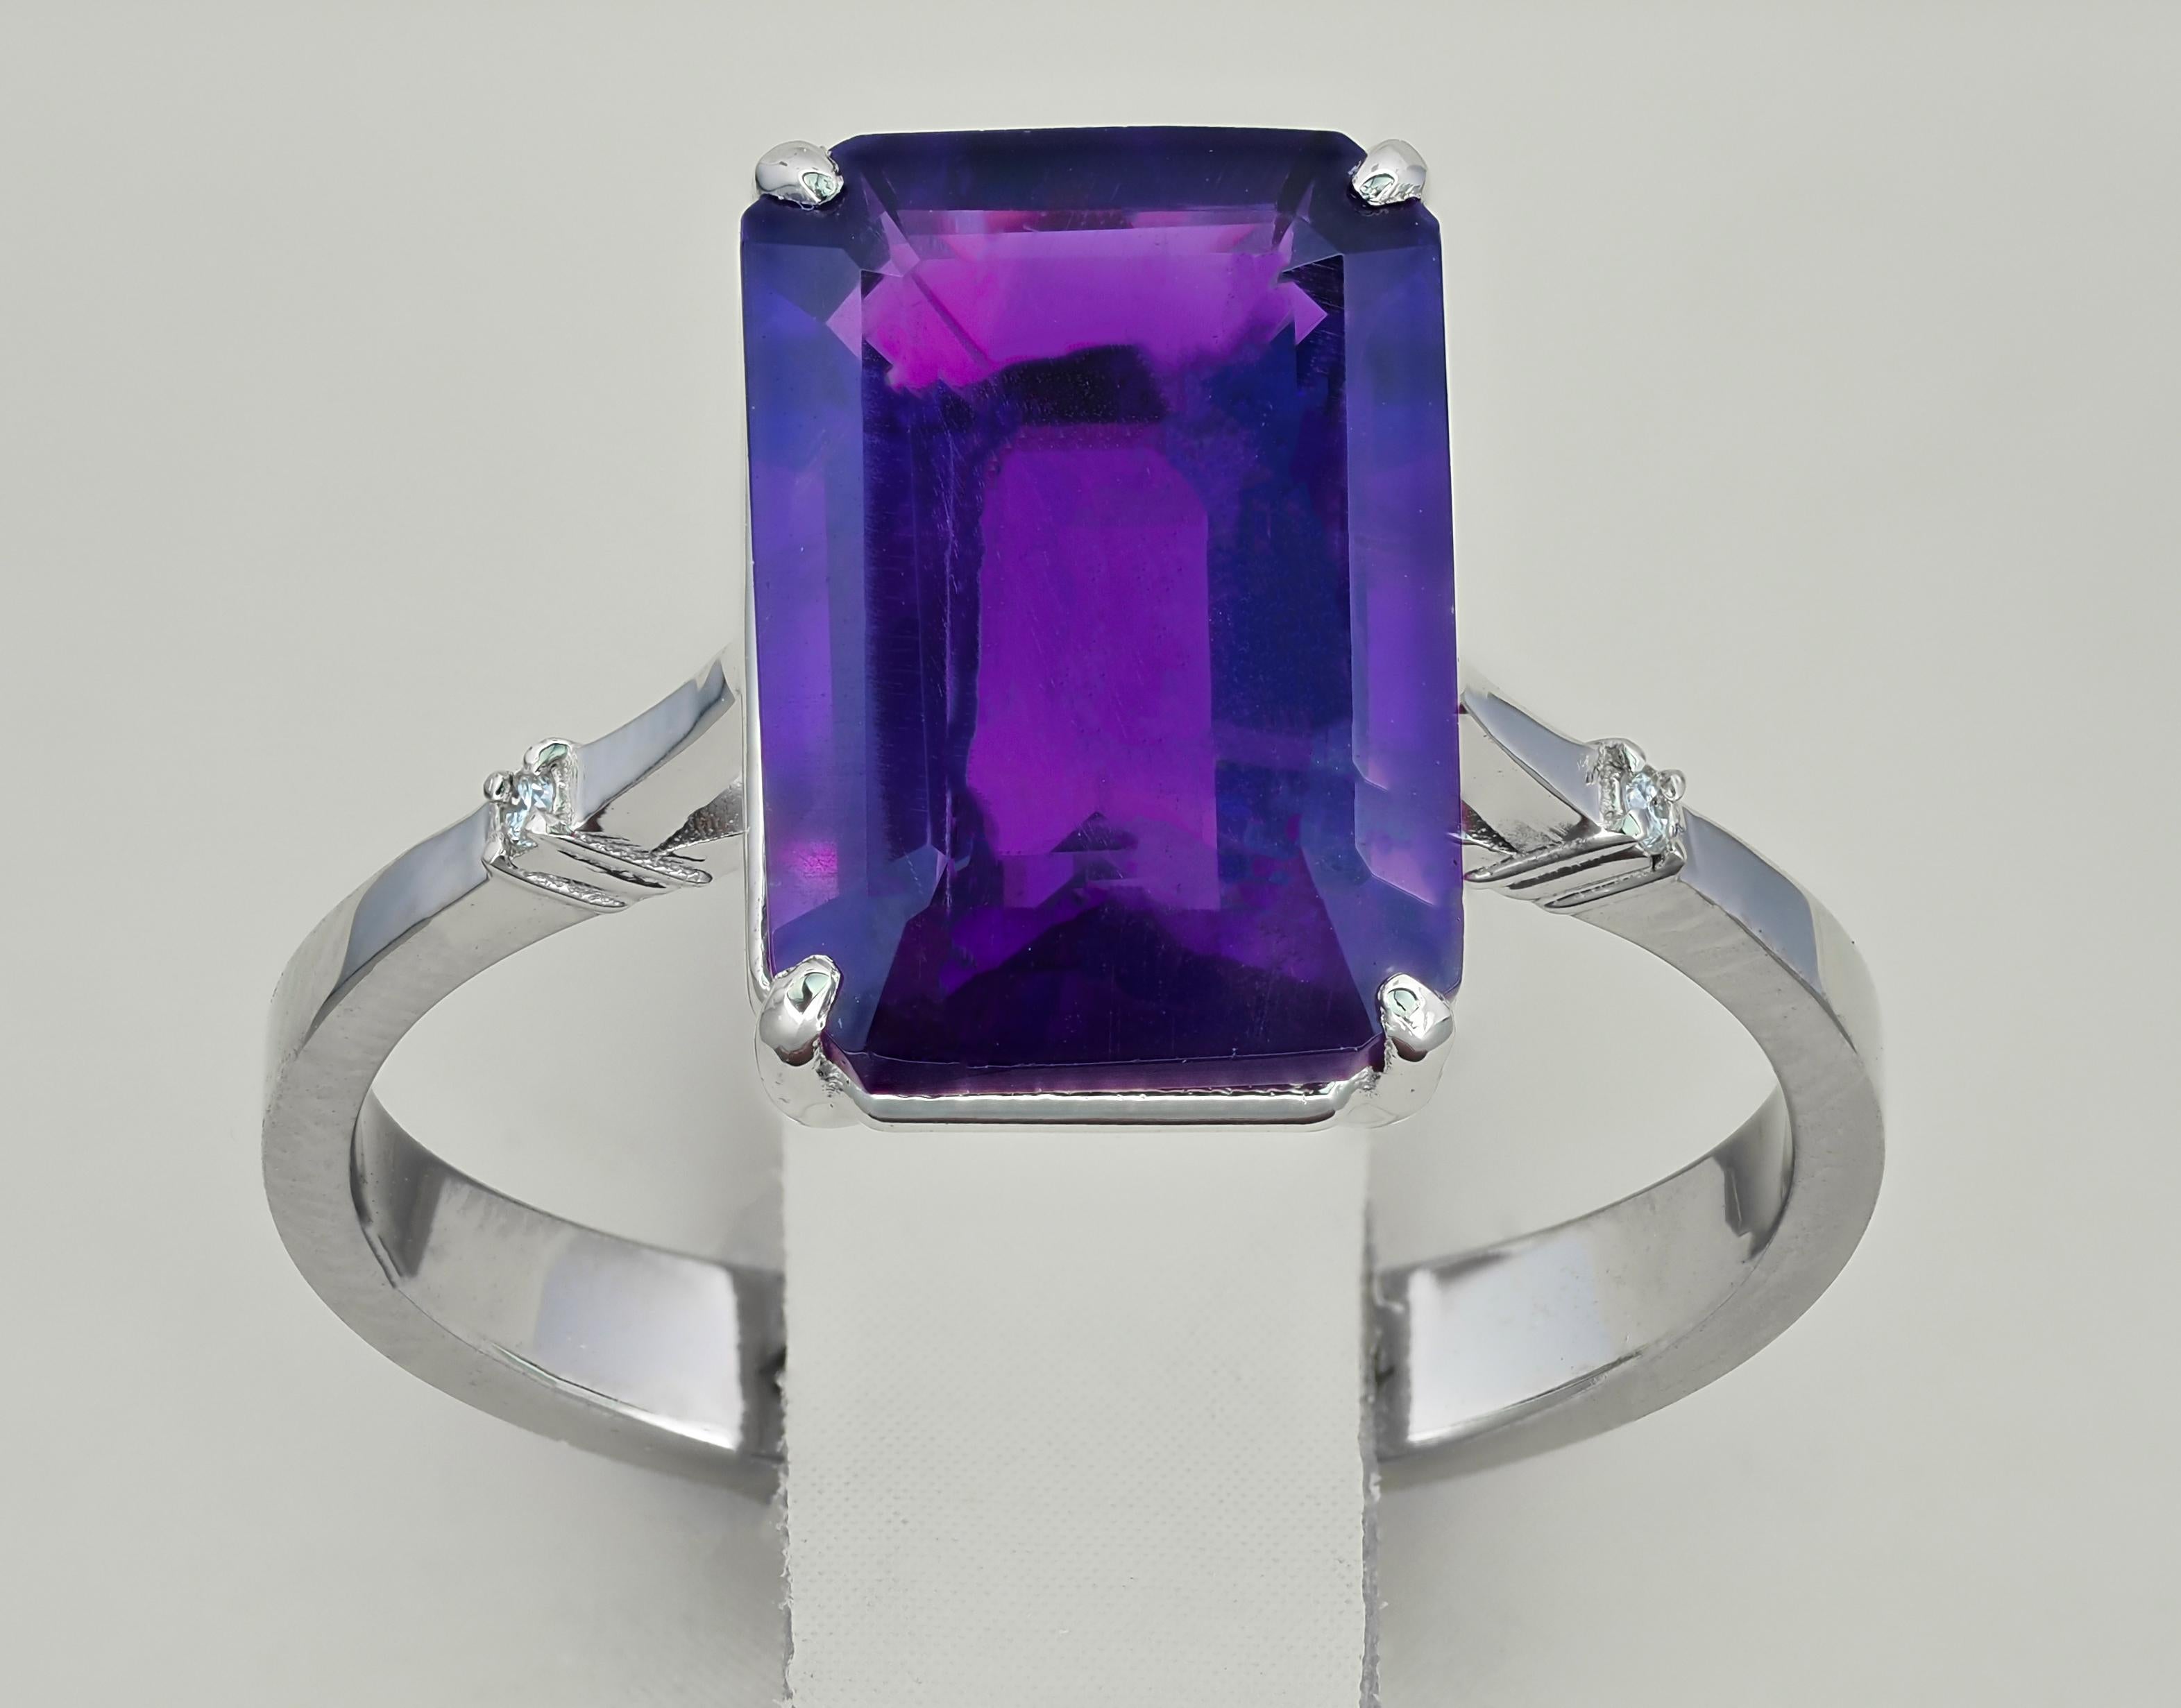 Ring with genuine amethyst and diamonds
Genuine amethyst ring
Metal: sterling silver 
Weight: 3 g. depends from size
 
Set with amethyst, color - violet
Emerald cut, aprox 3 ct. in total (11.5x8.5mm)
Clarity: Transparent with iclusions

Surrounding